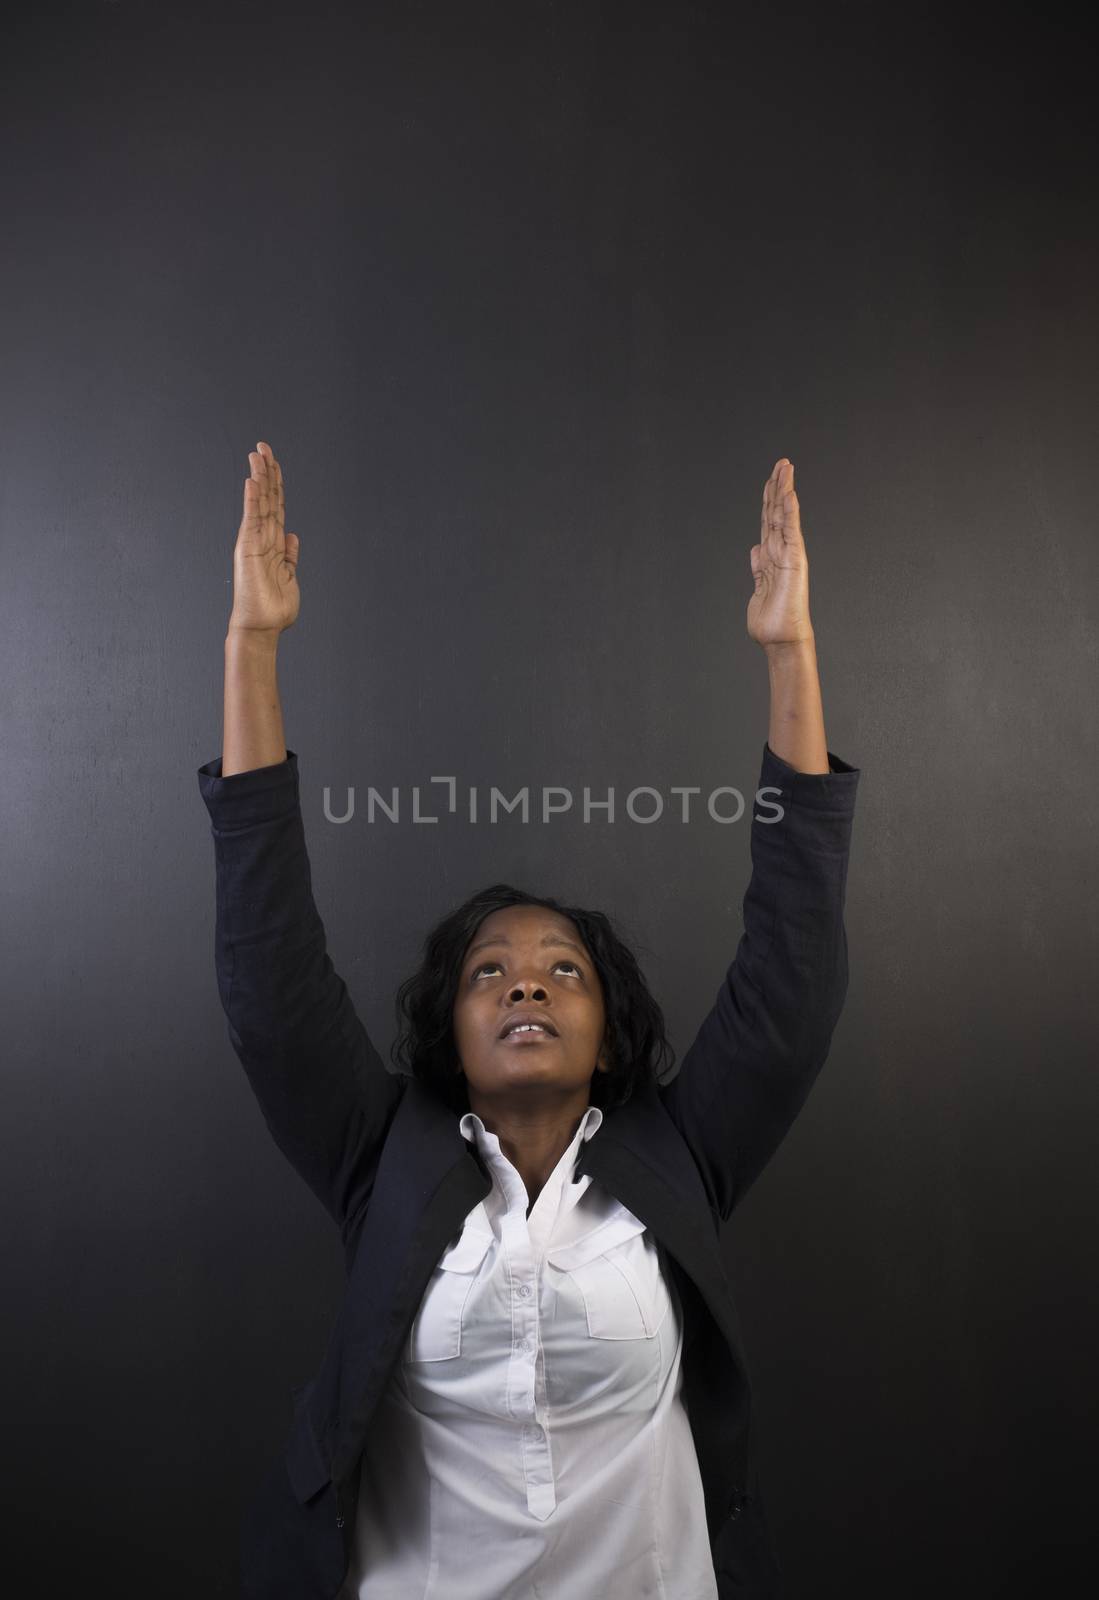 South African or African American woman teacher or student reaching for sky by alistaircotton